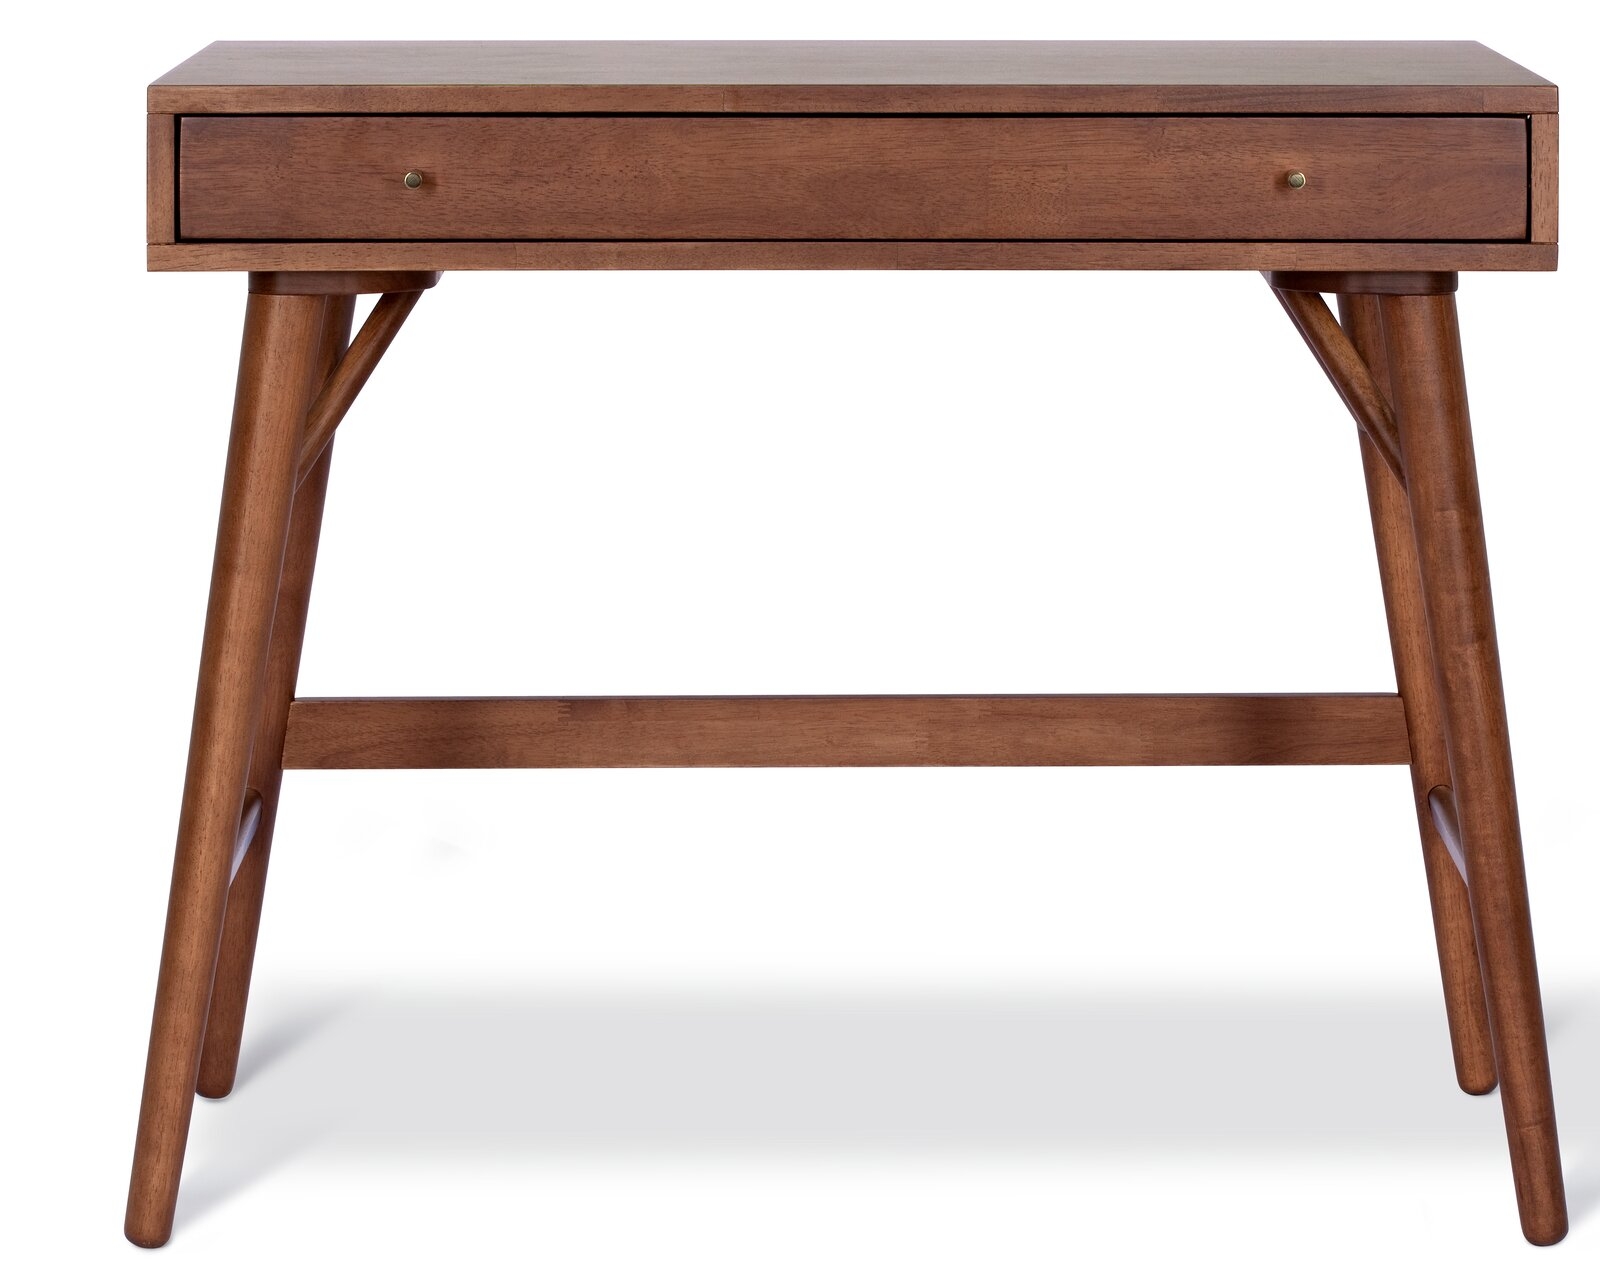 Lundquist Solid Wood Desk - Image 1